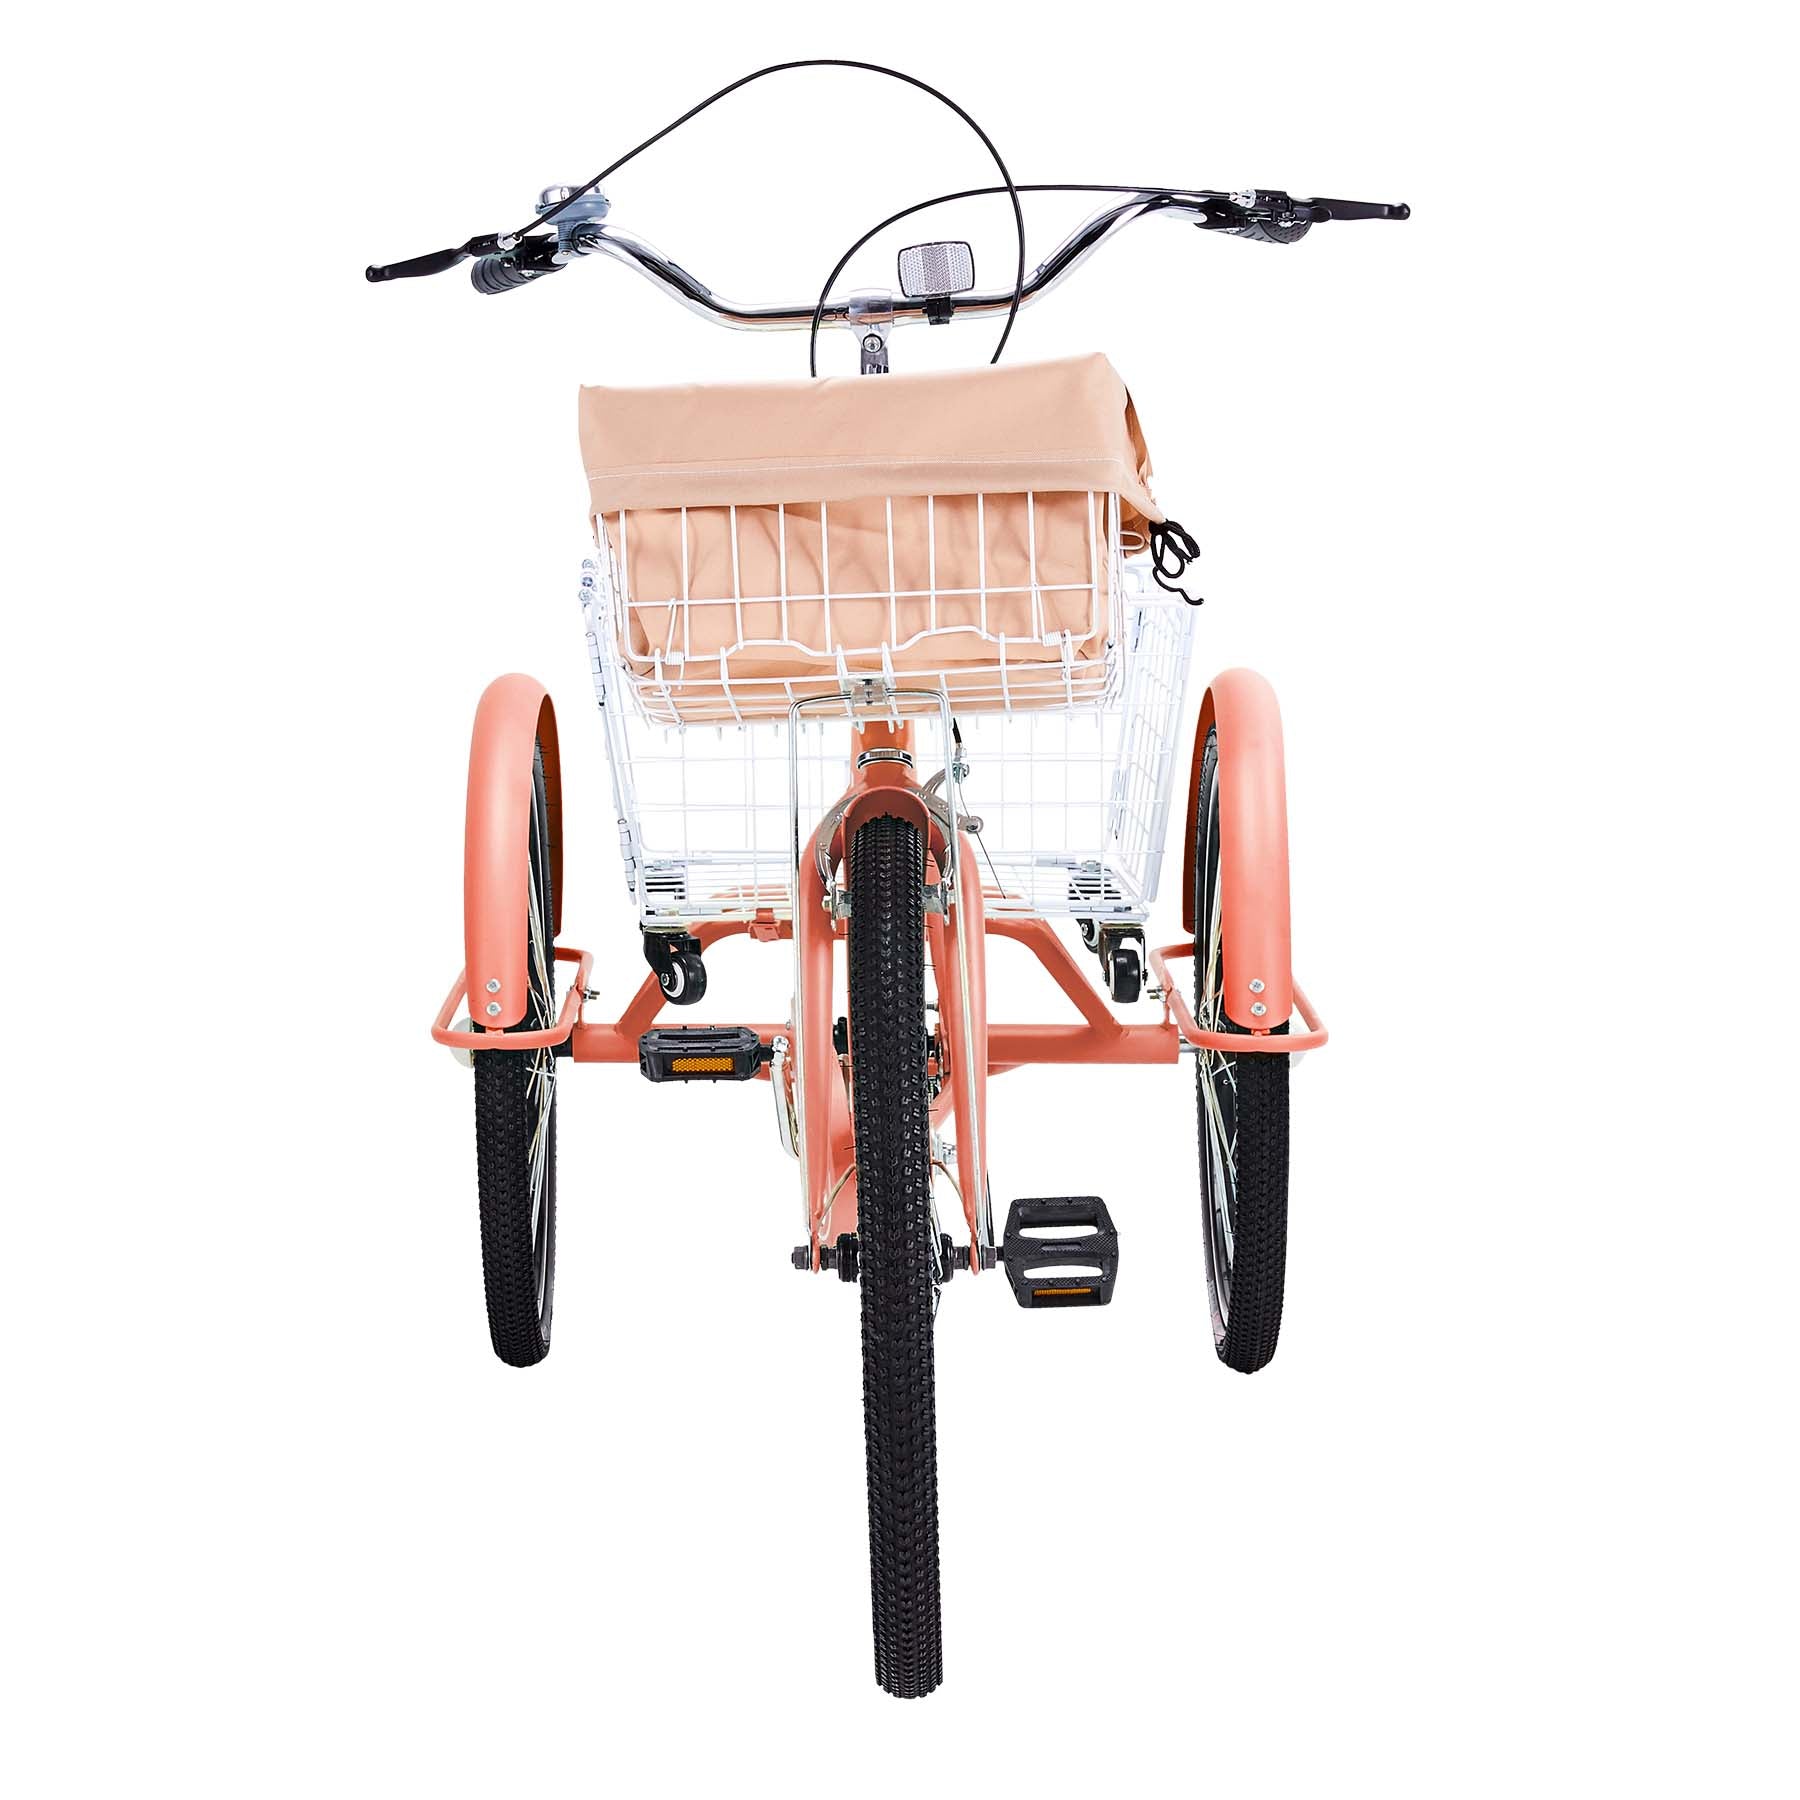 viribus 24"&26" Adult Tricycle with Removable Wheeled Basket, Pink